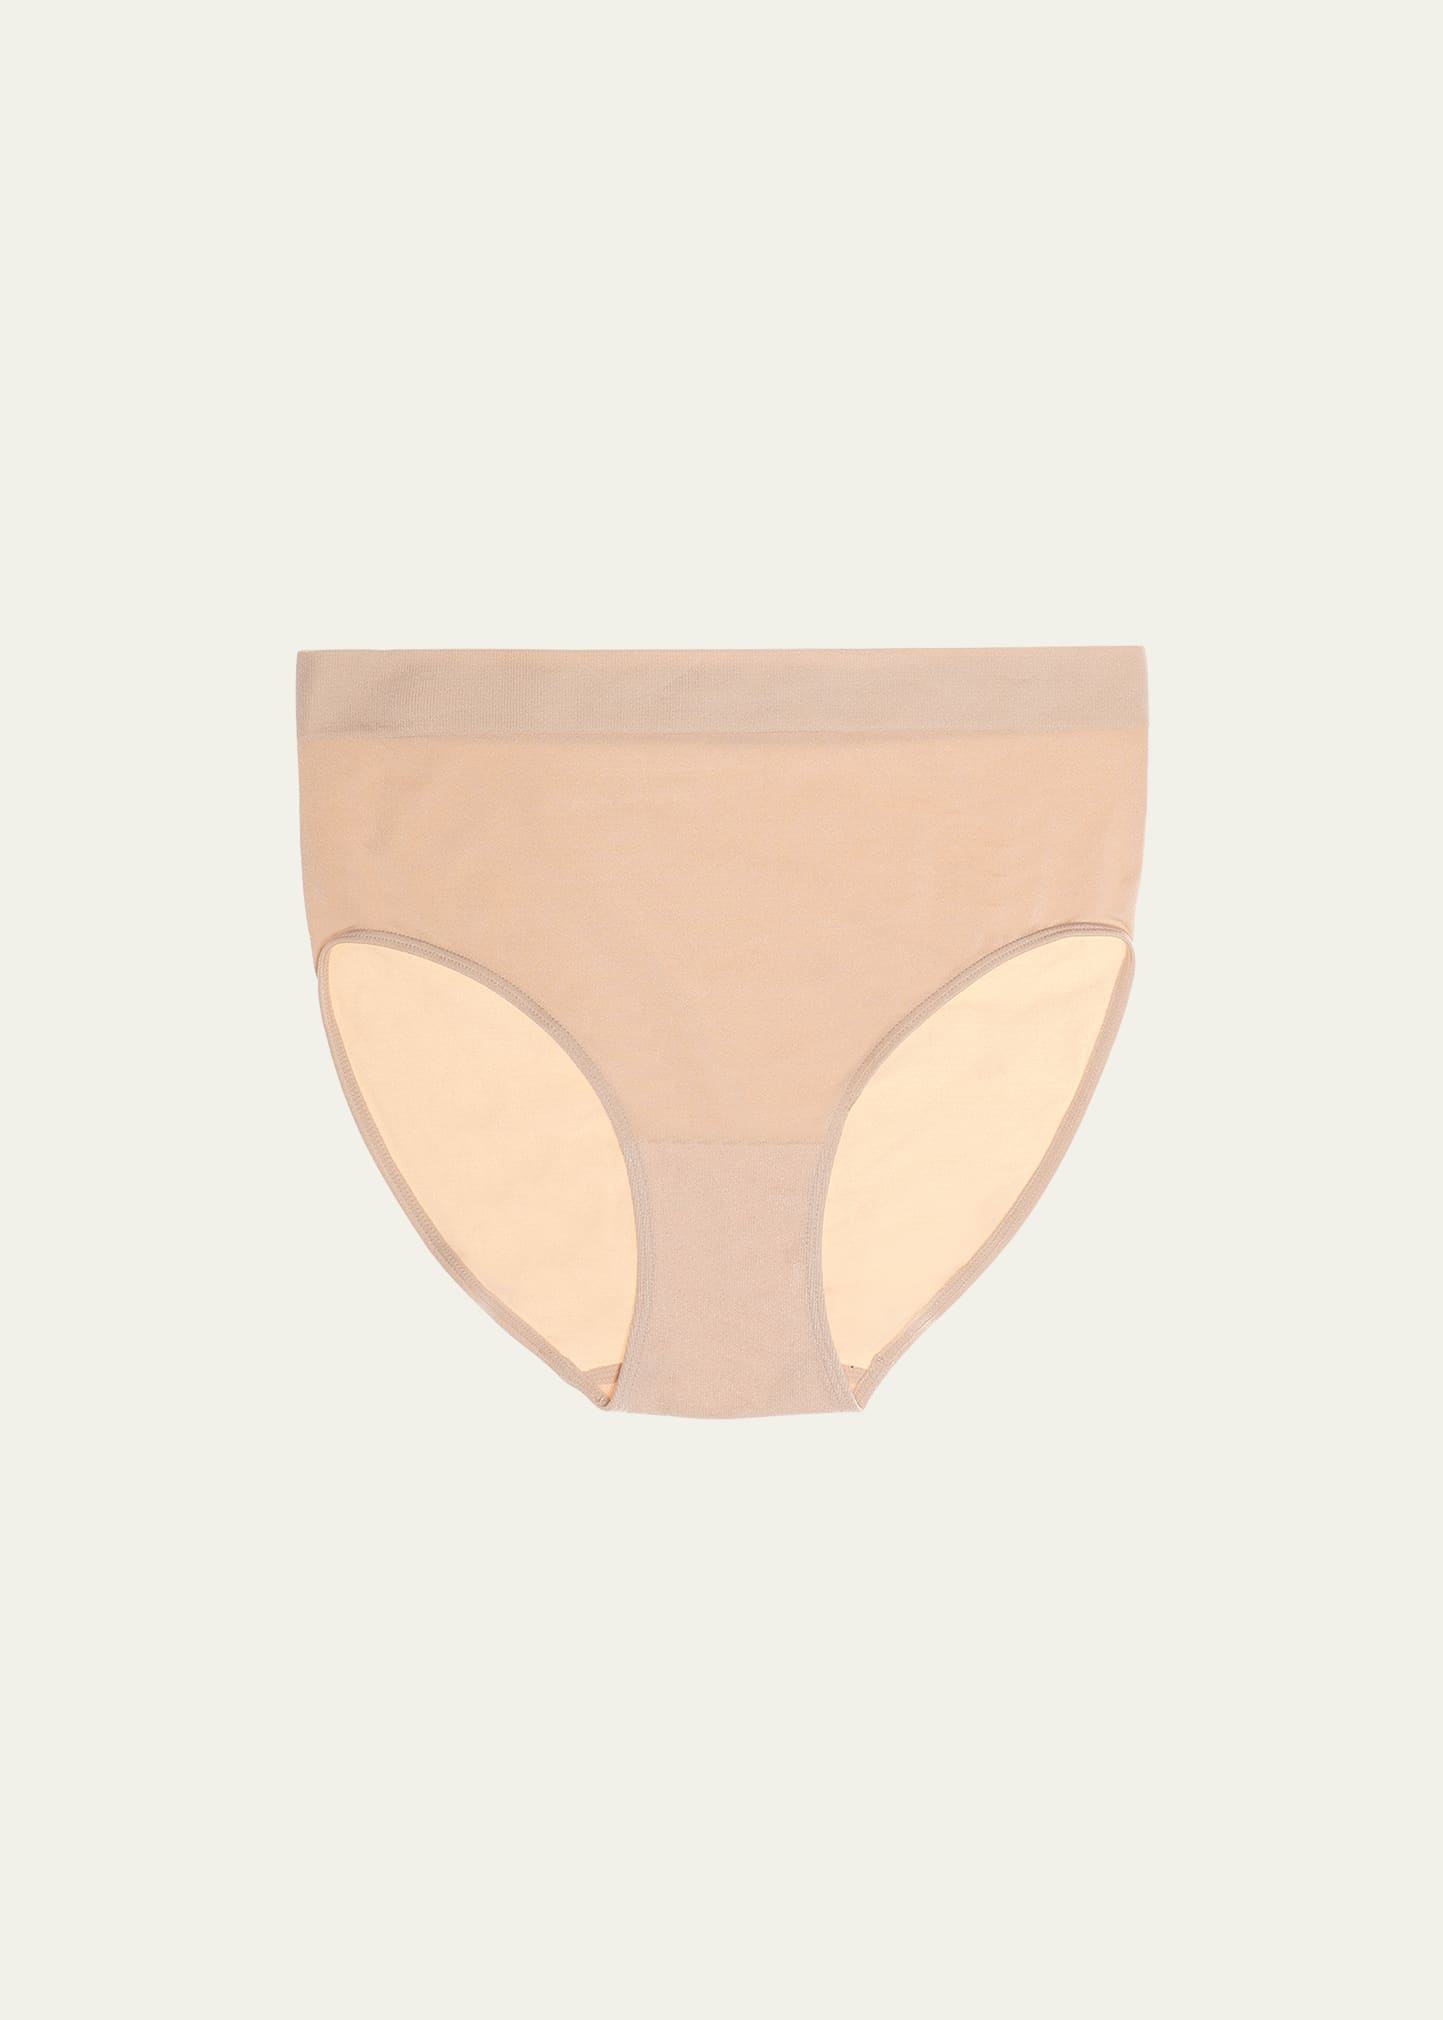 Wacoal B-Smooth Seamless Brief 3-Pack 870175 - Rose Dust, Deep Taupe, Black